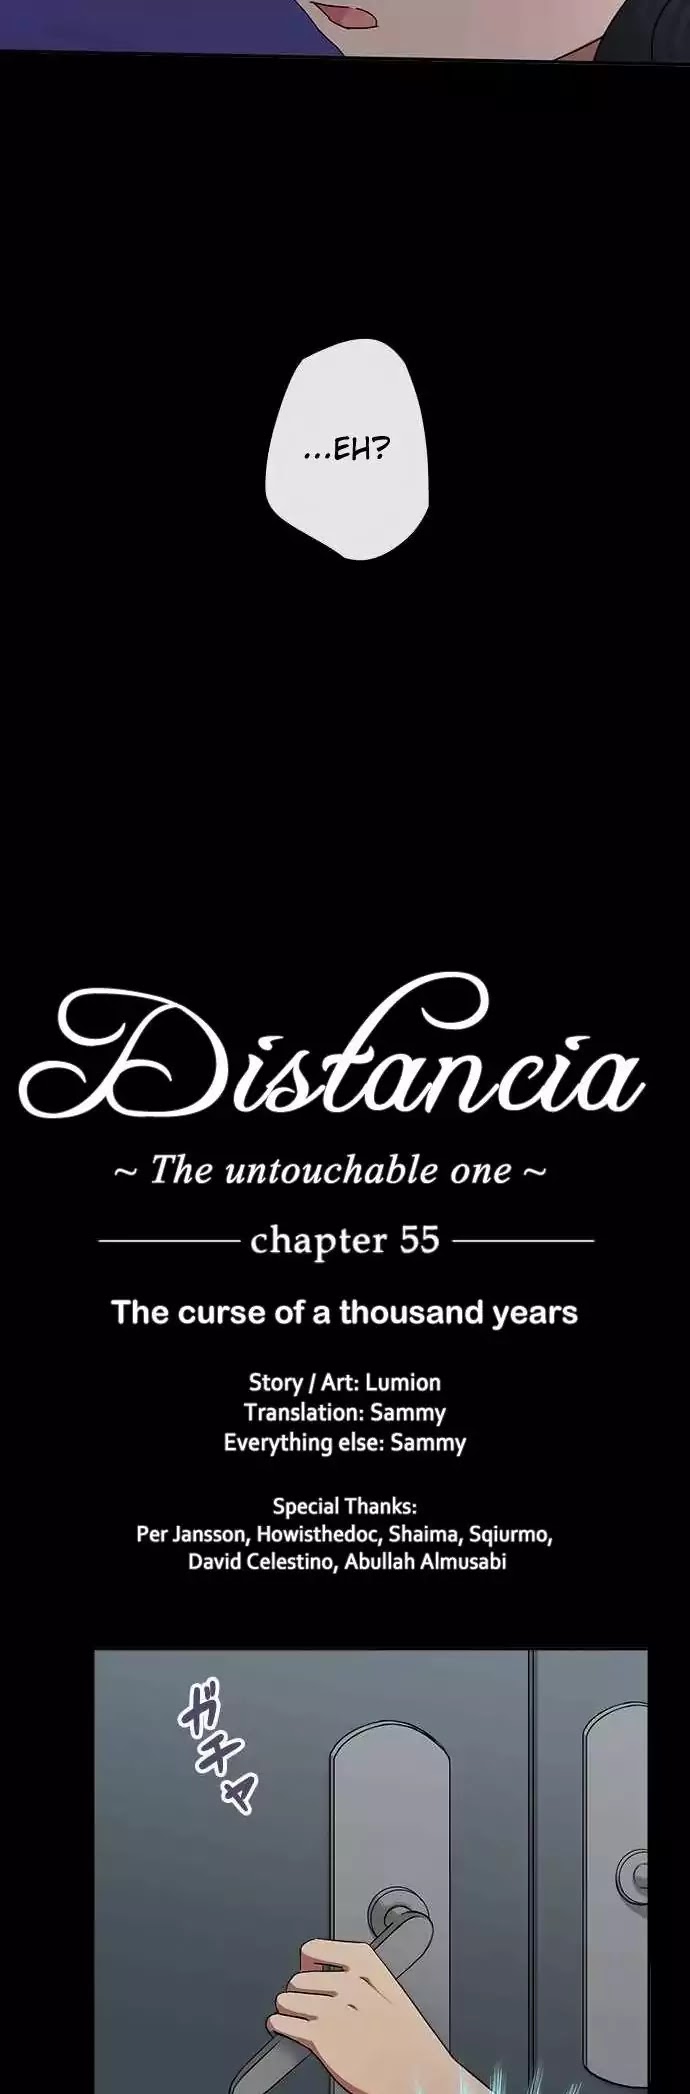 Distancia ~ The Untouchable One ~ - Page 2